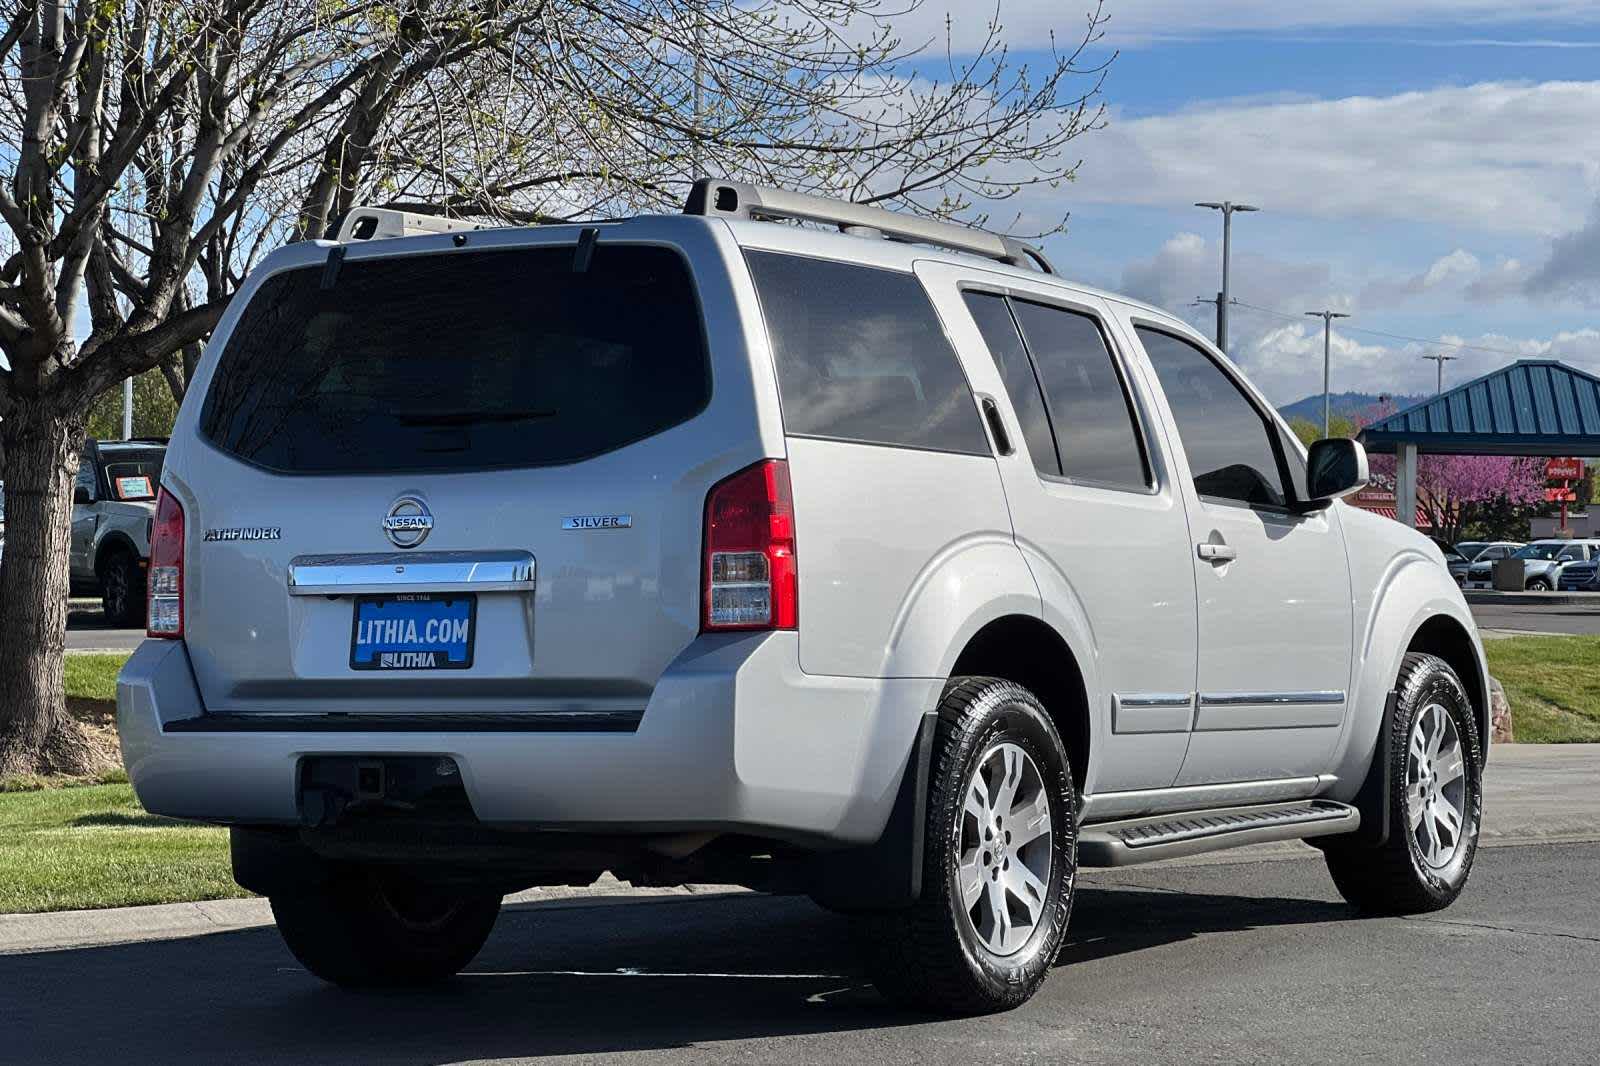 Used 2011 Nissan Pathfinder Silver Edition with VIN 5N1AR1NB0BC624436 for sale in Boise, ID